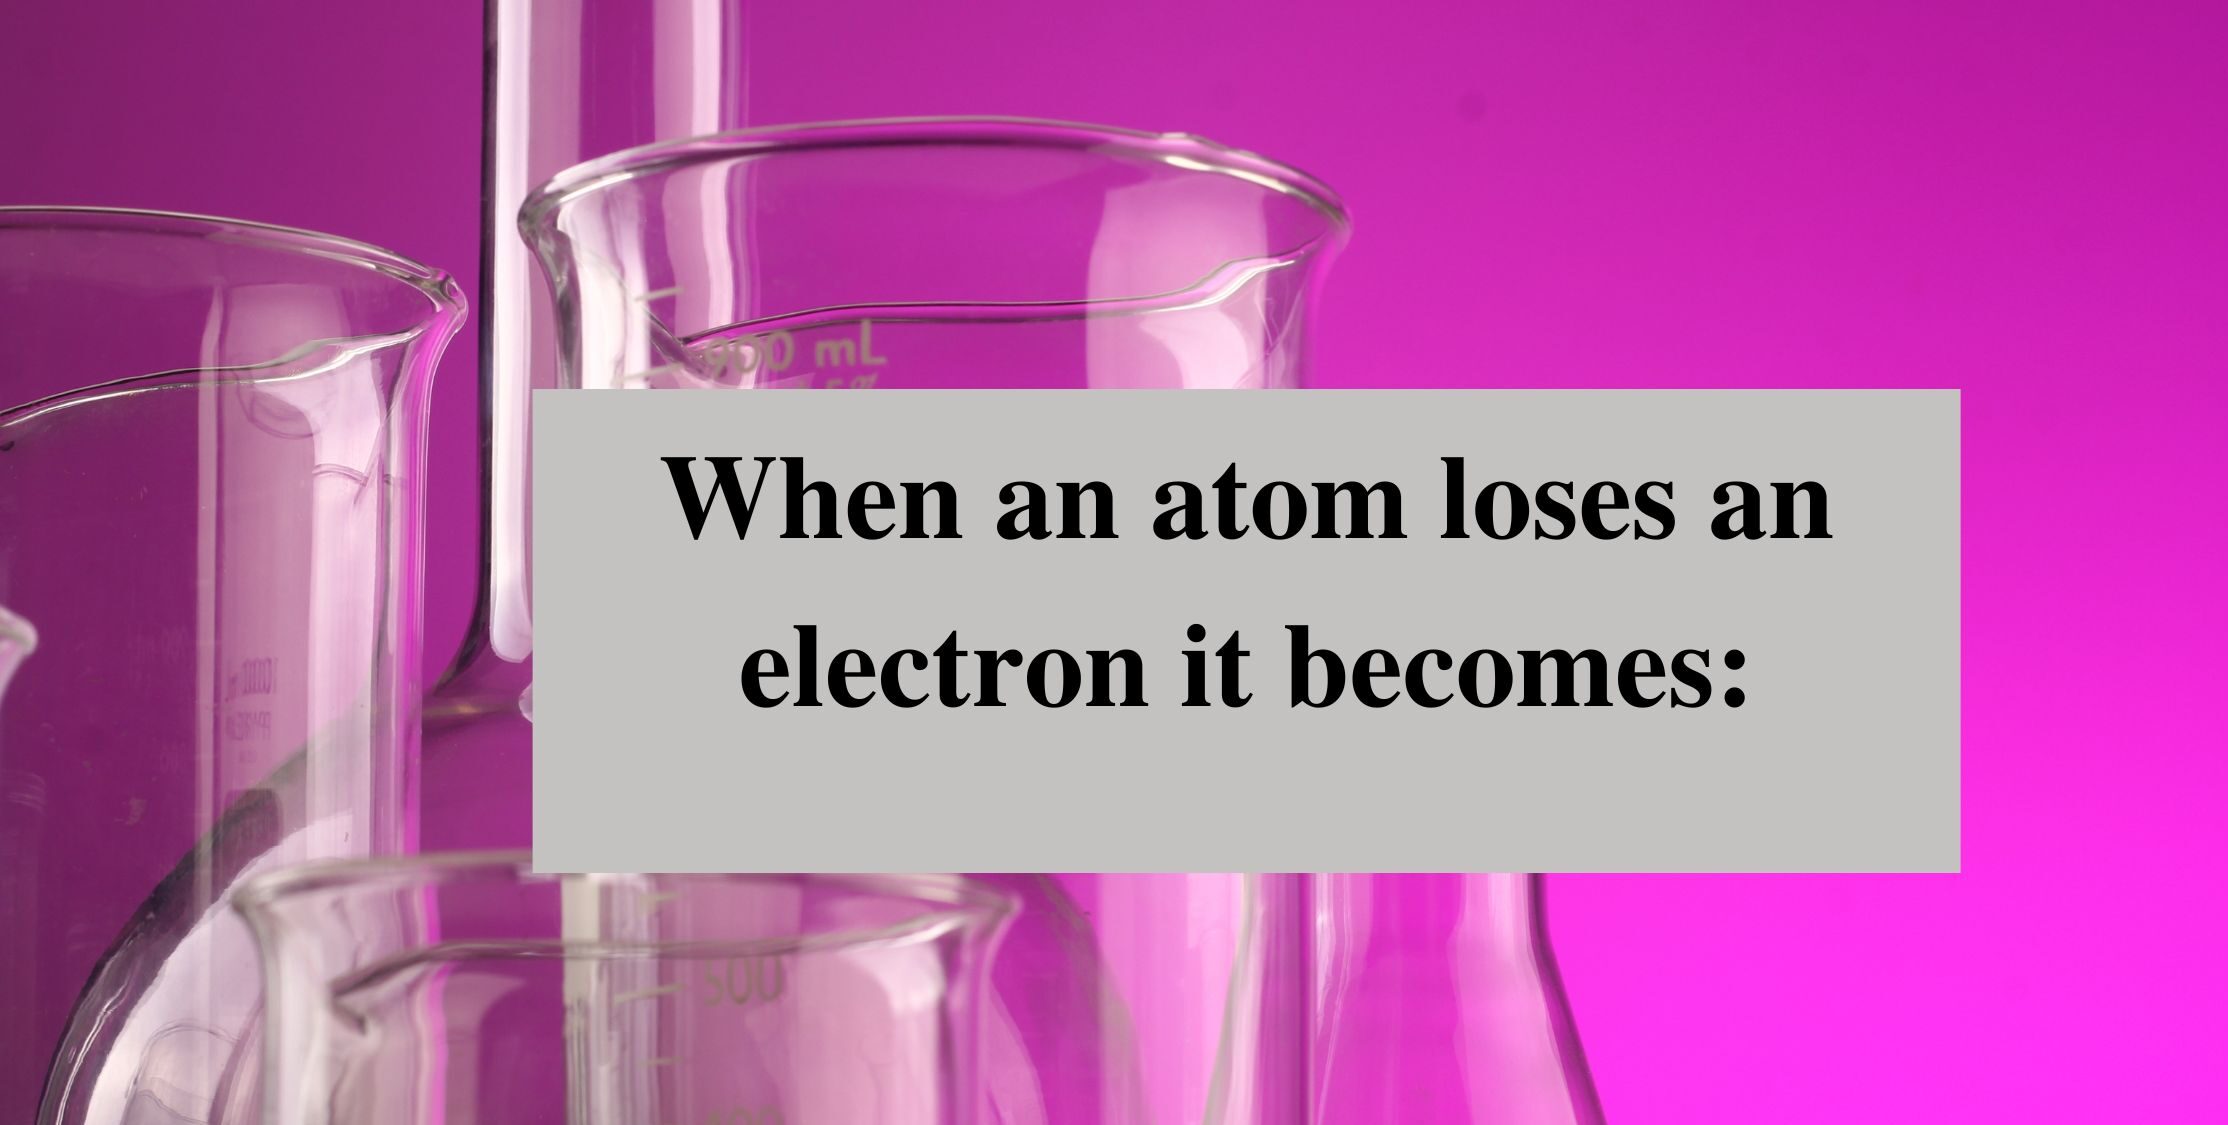 When an atom loses an electron it becomes: